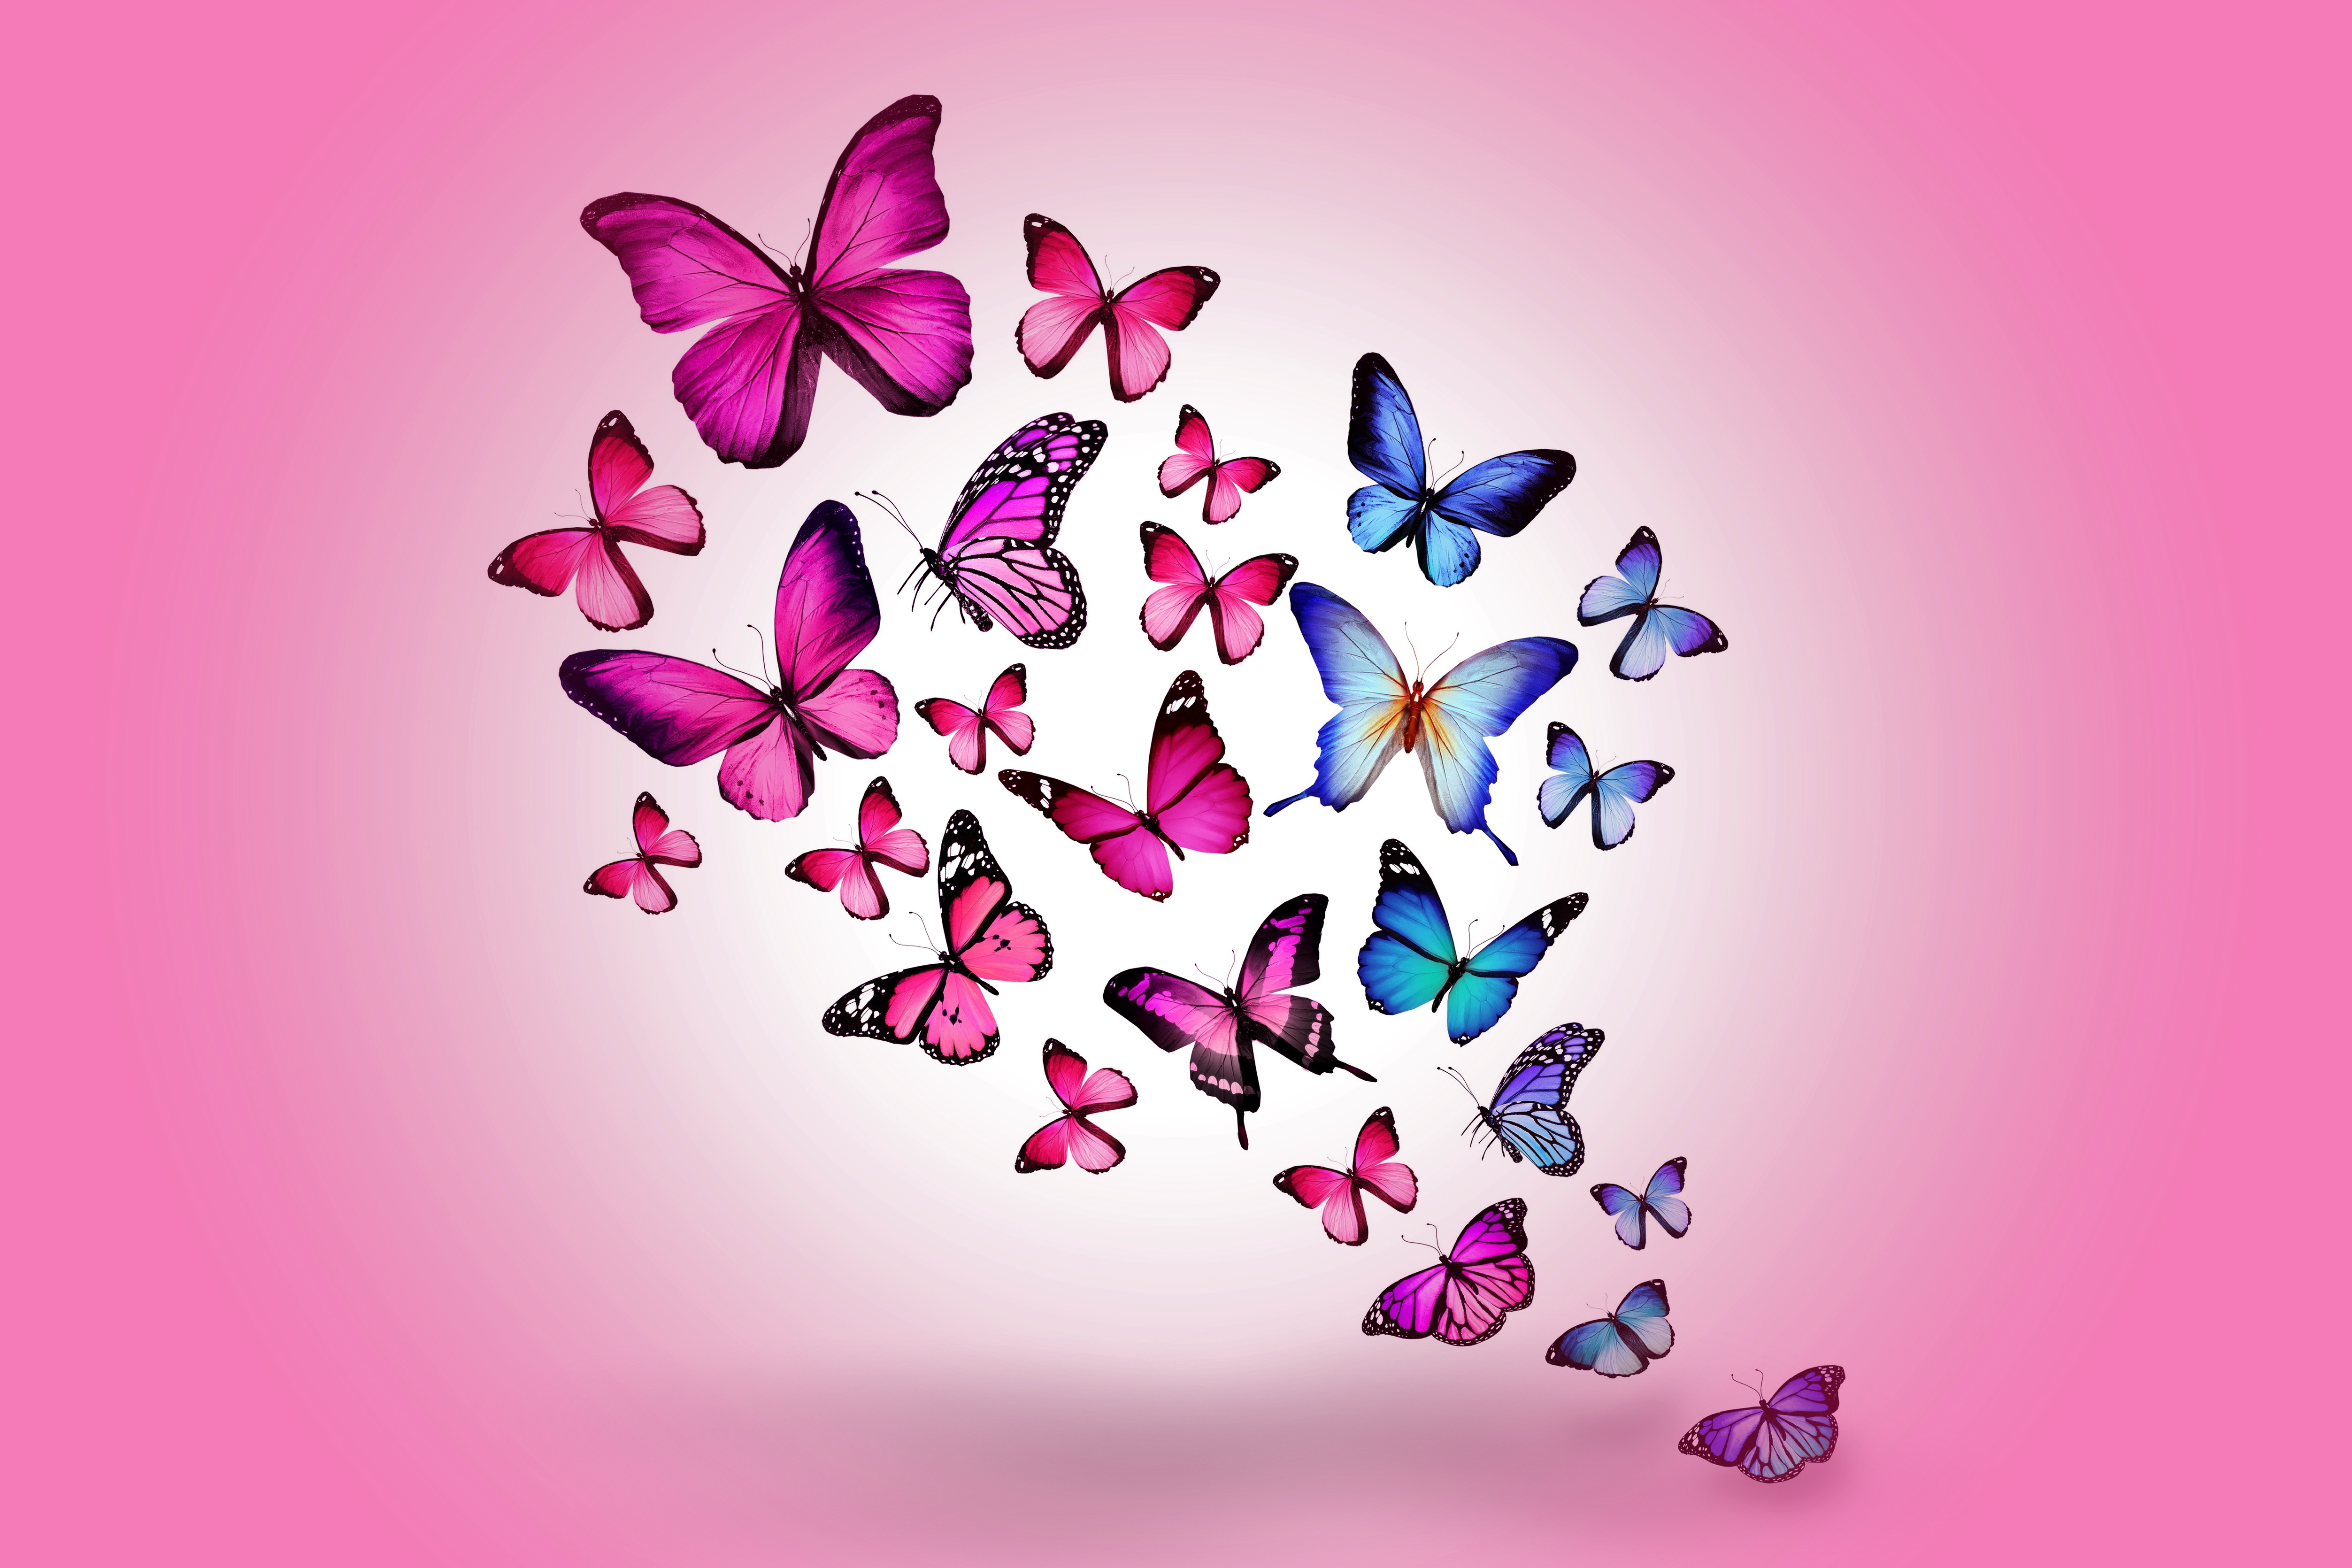 background, butterflies, multicolored, drawing, pink, miscellanea, miscellaneous, picture, flight